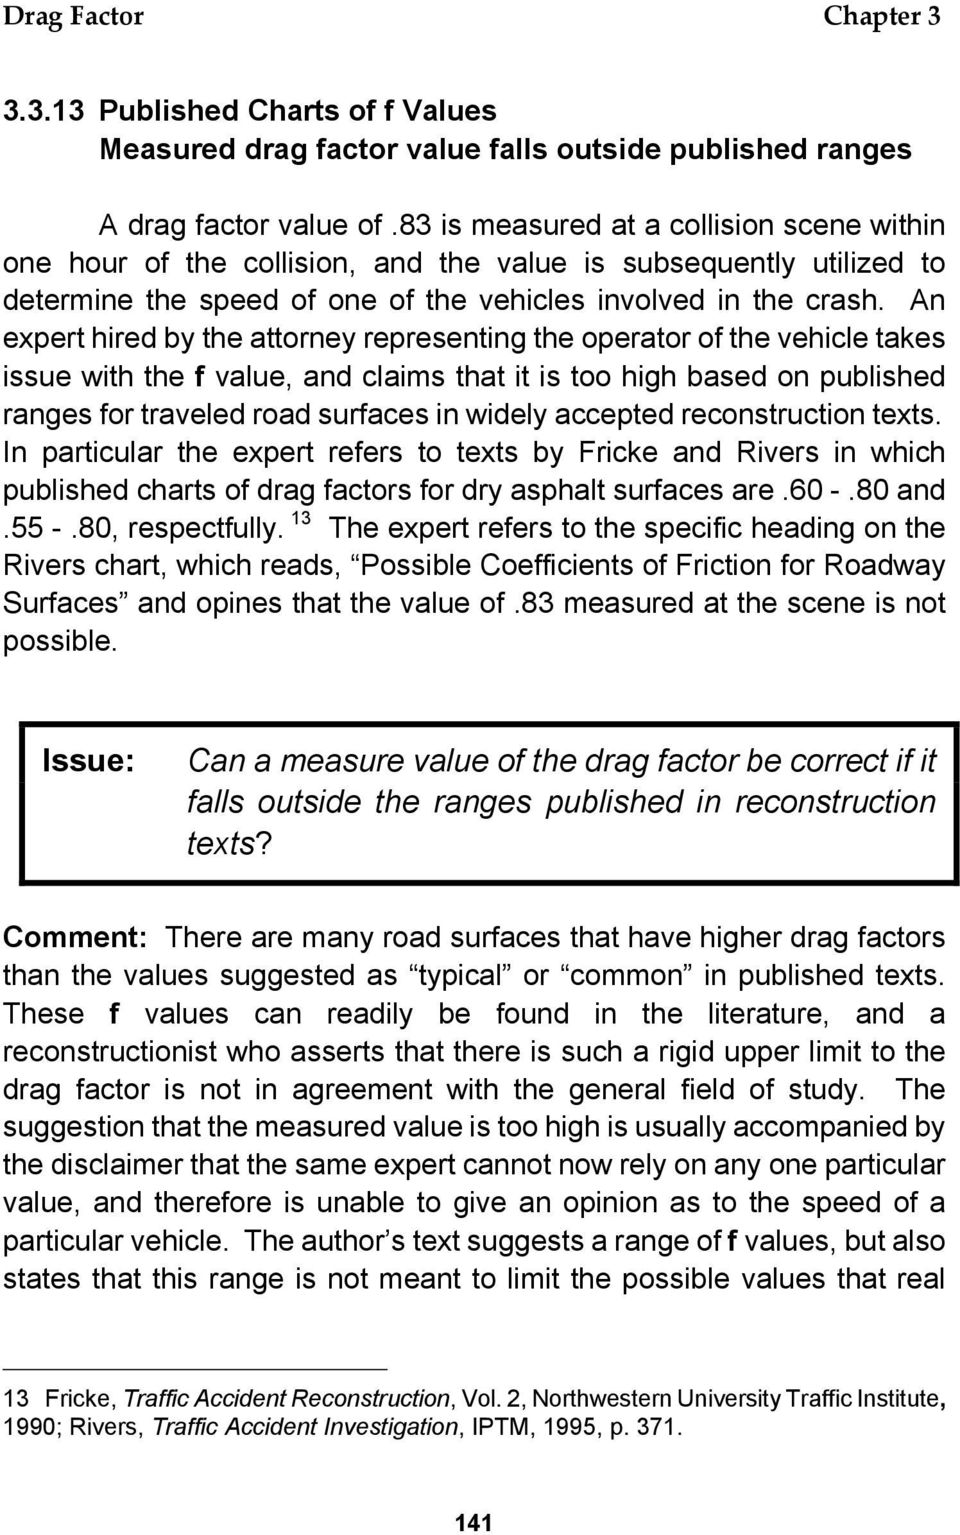 An expert hired by the attorney representing the operator of the vehicle takes issue with the f value, and claims that it is too high based on published ranges for traveled road surfaces in widely